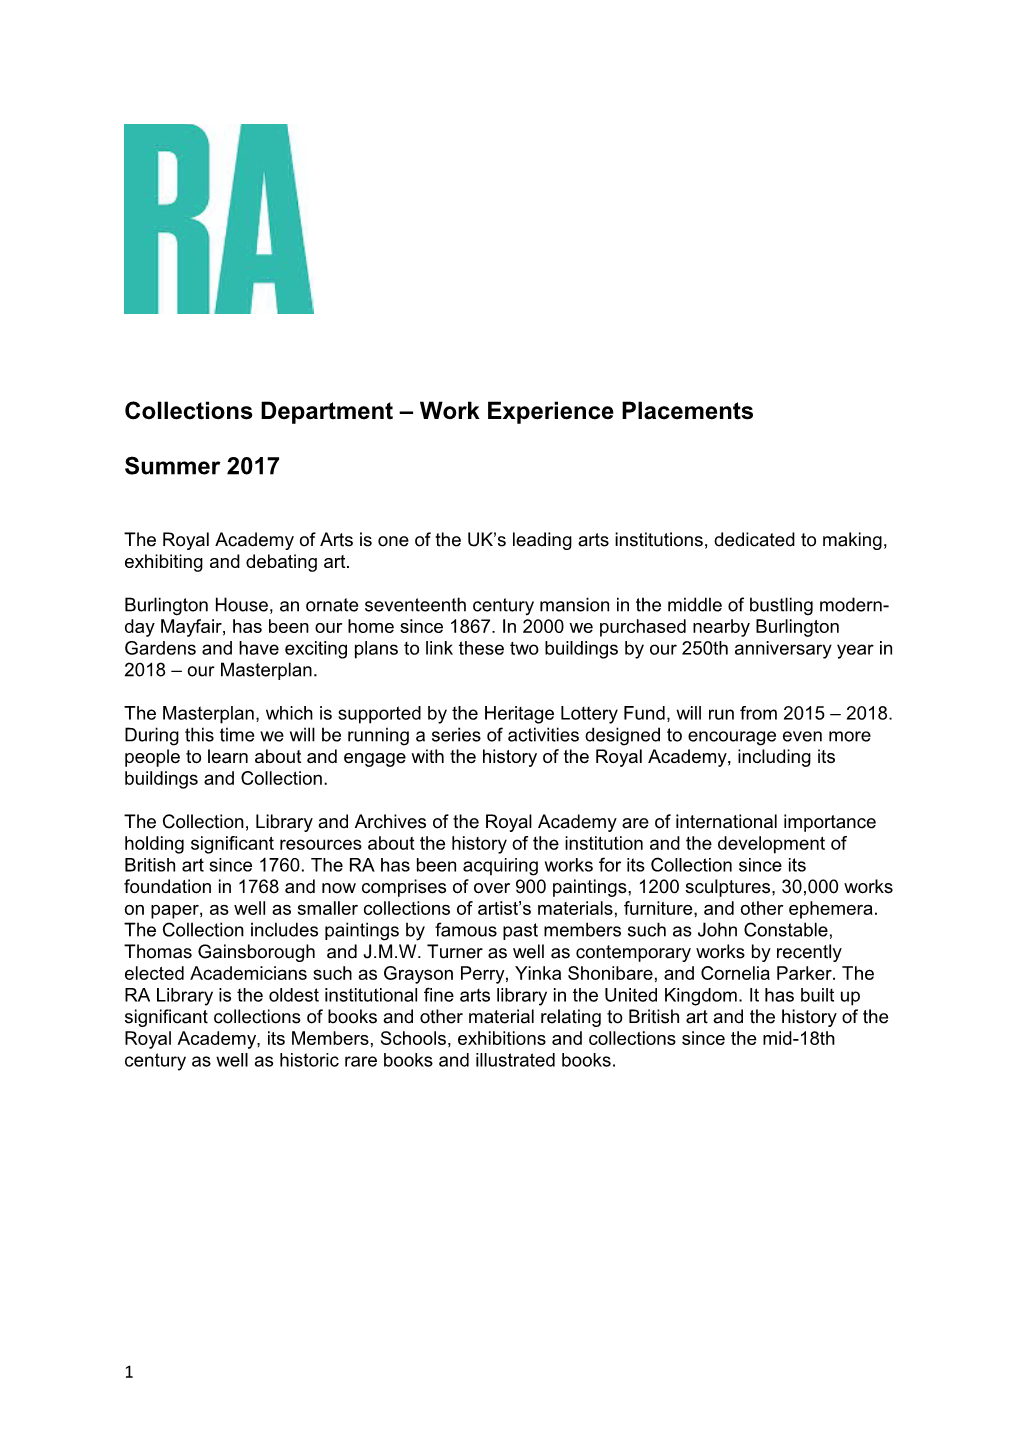 Collections Department Workexperience Placements